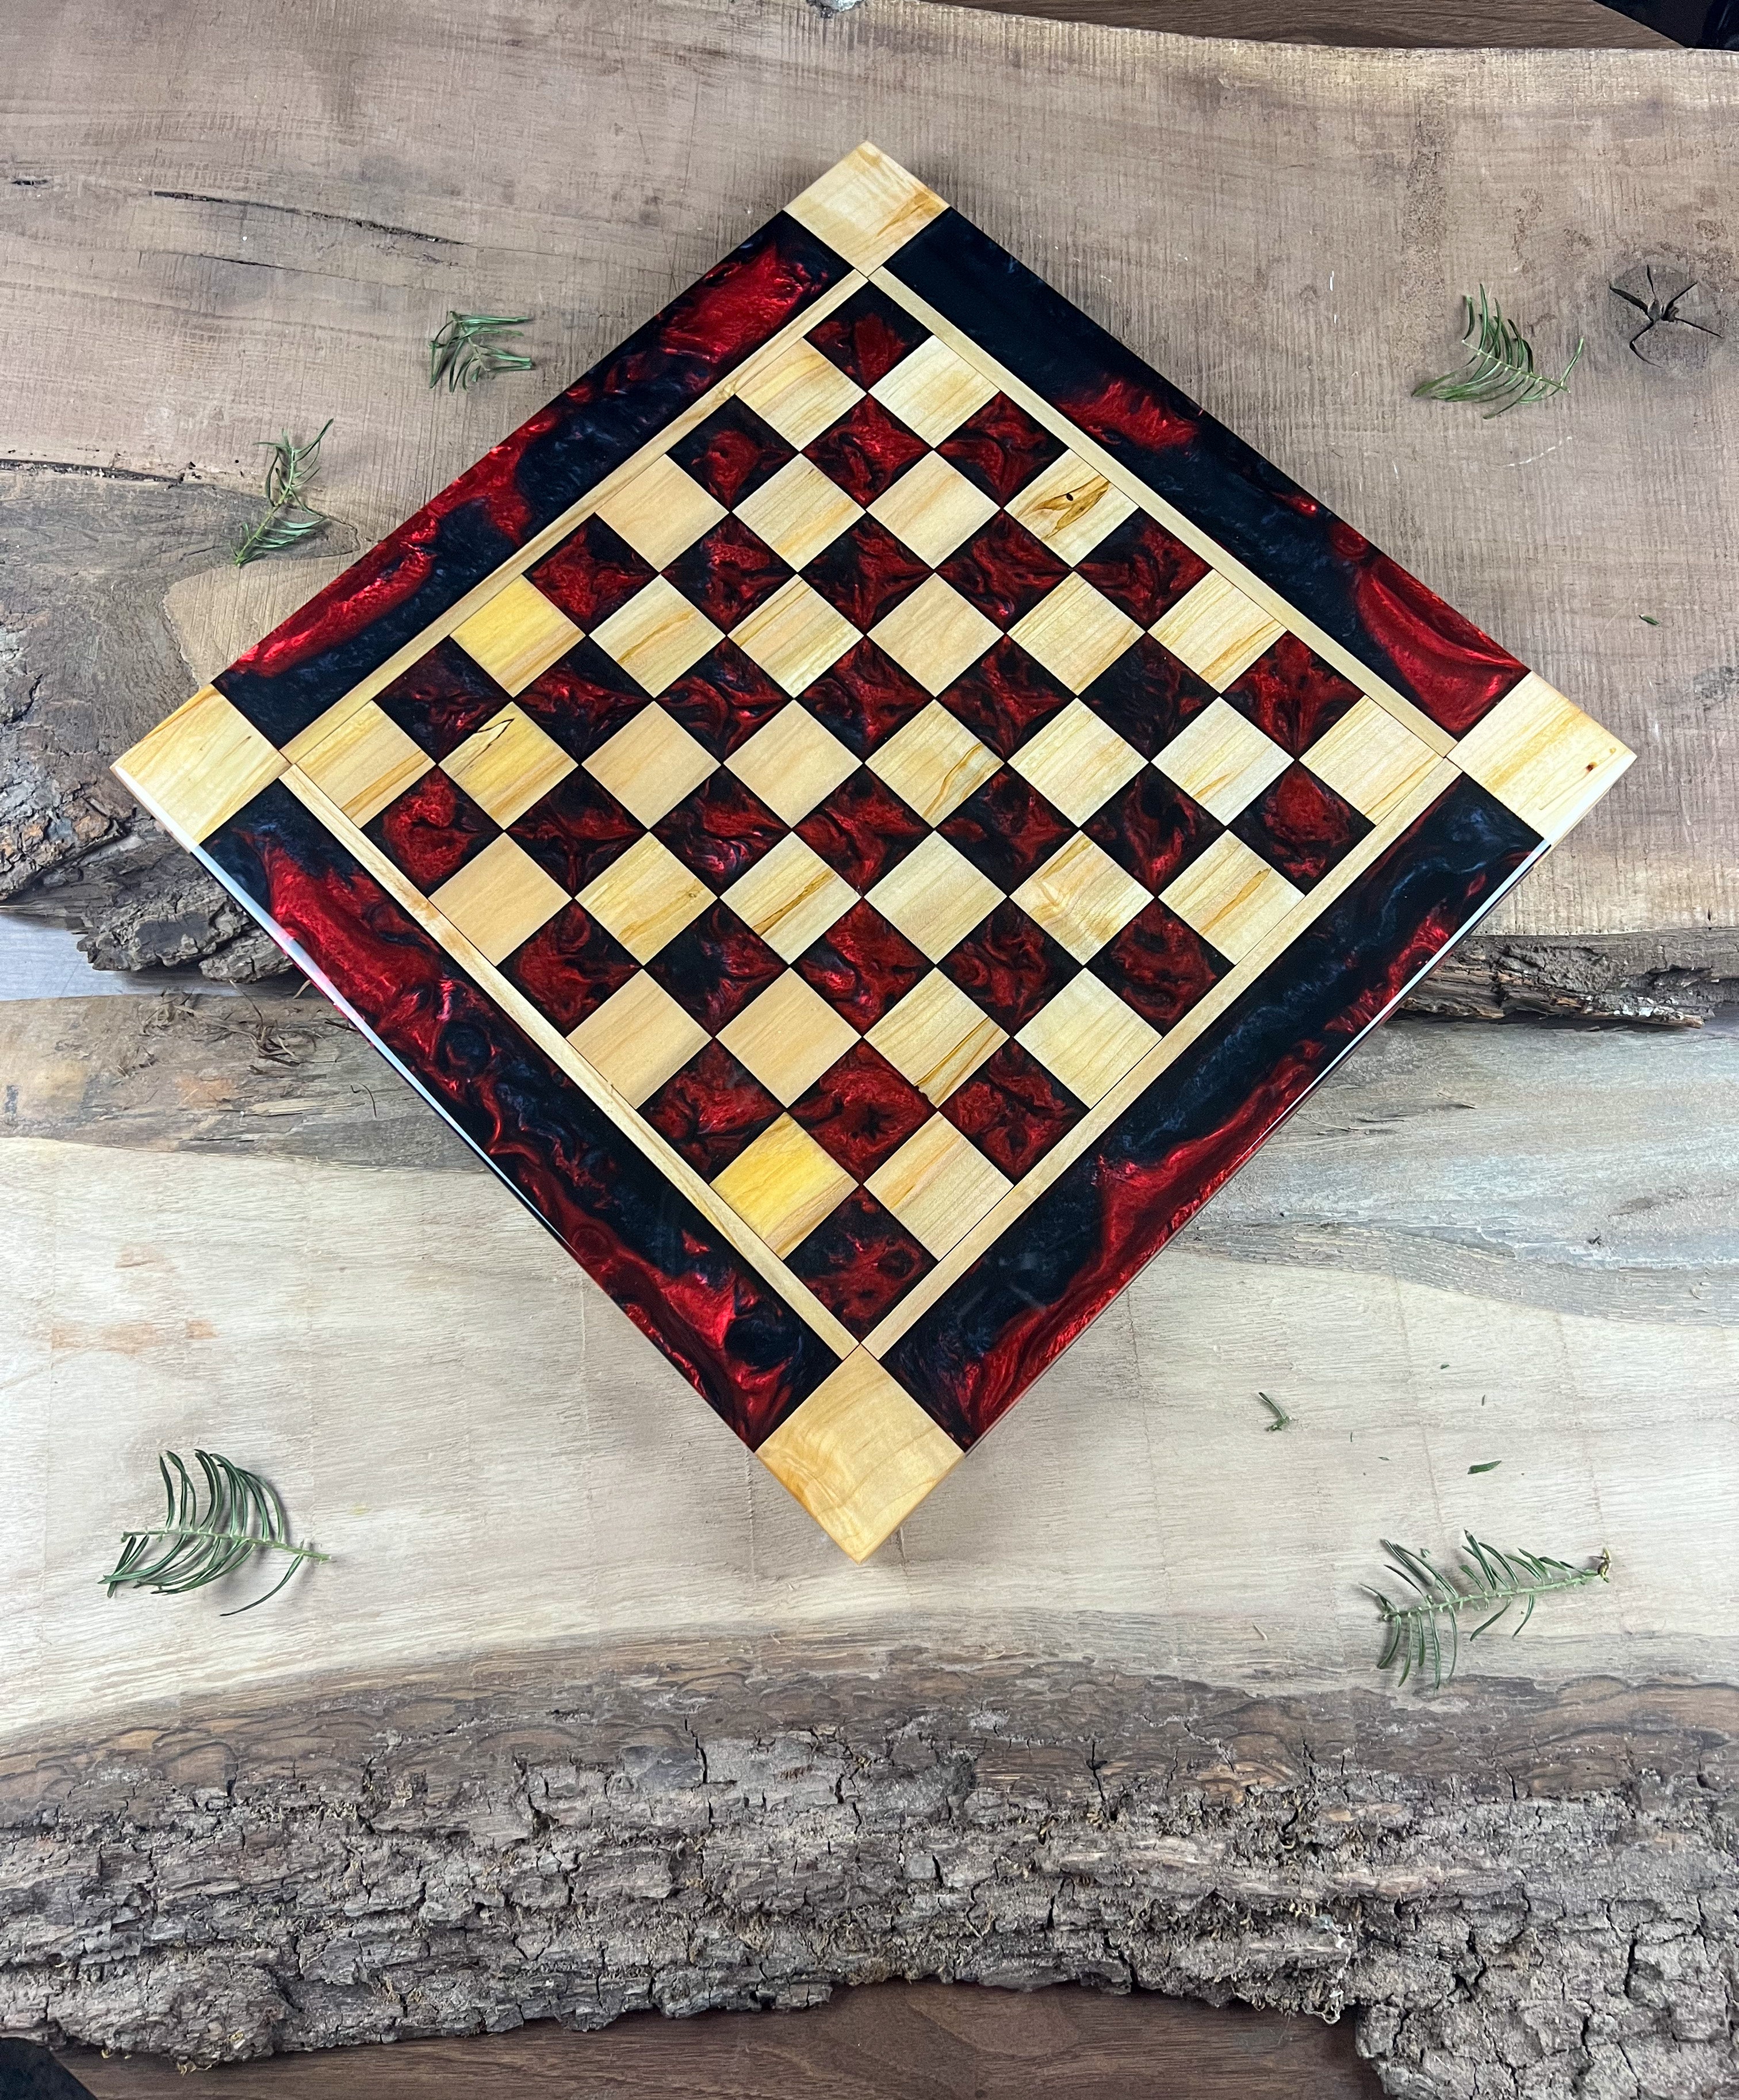 Red and Black Maple Wood Chess Board (With Border)